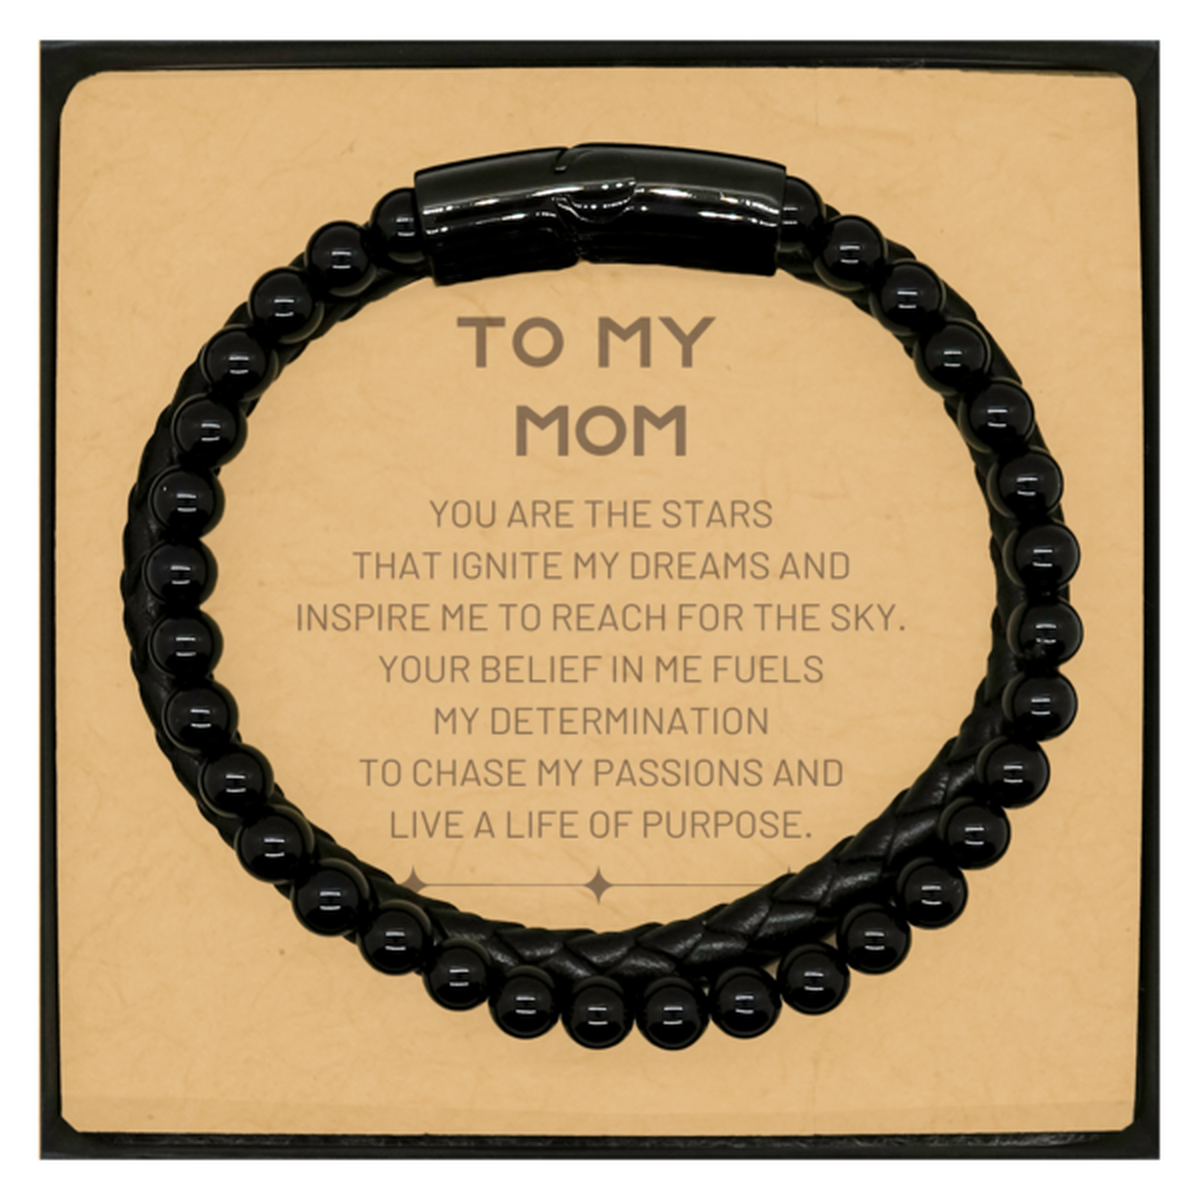 To My Mom Stone Leather Bracelets, You are the stars that ignite my dreams and inspire me to reach for the sky, Birthday Christmas Unique Gifts For Mom, Thank You Gifts For Mom